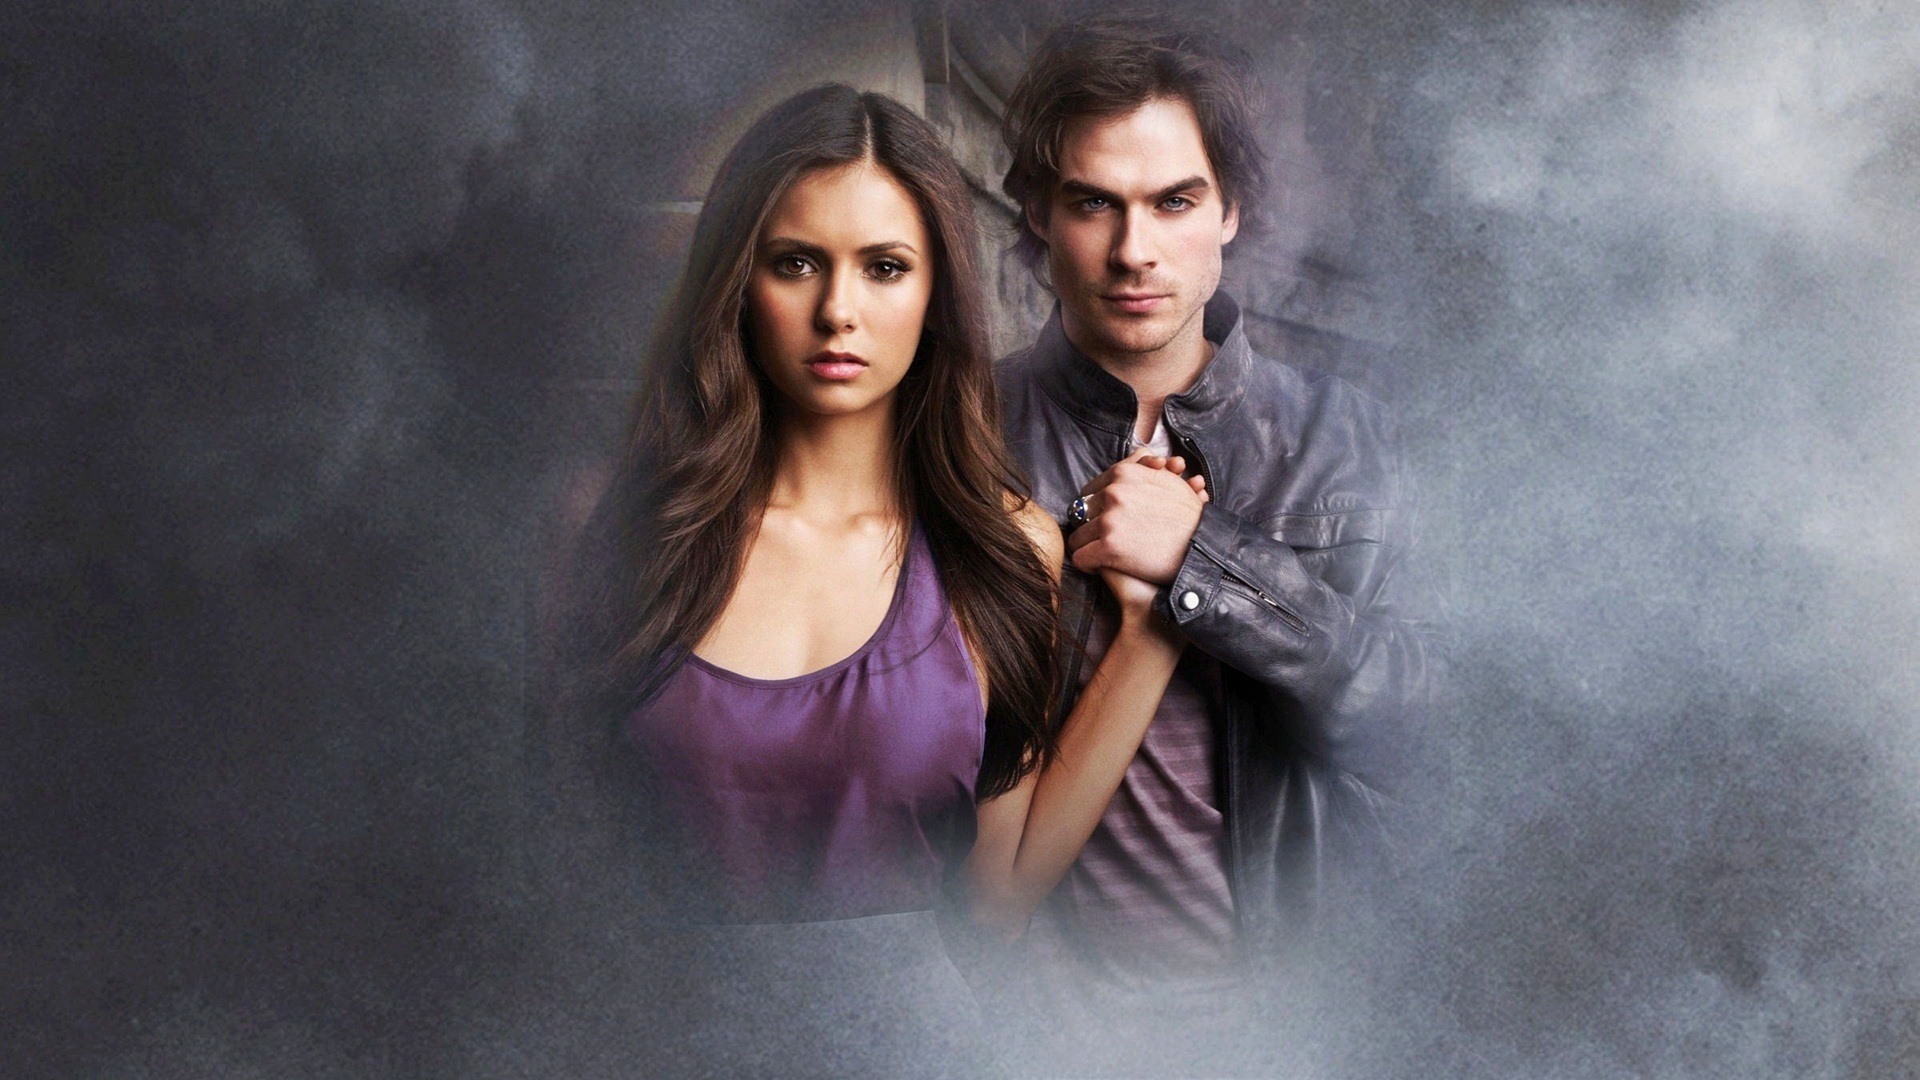 The Vampire Diaries HD Wallpapers #11 - 1920x1080